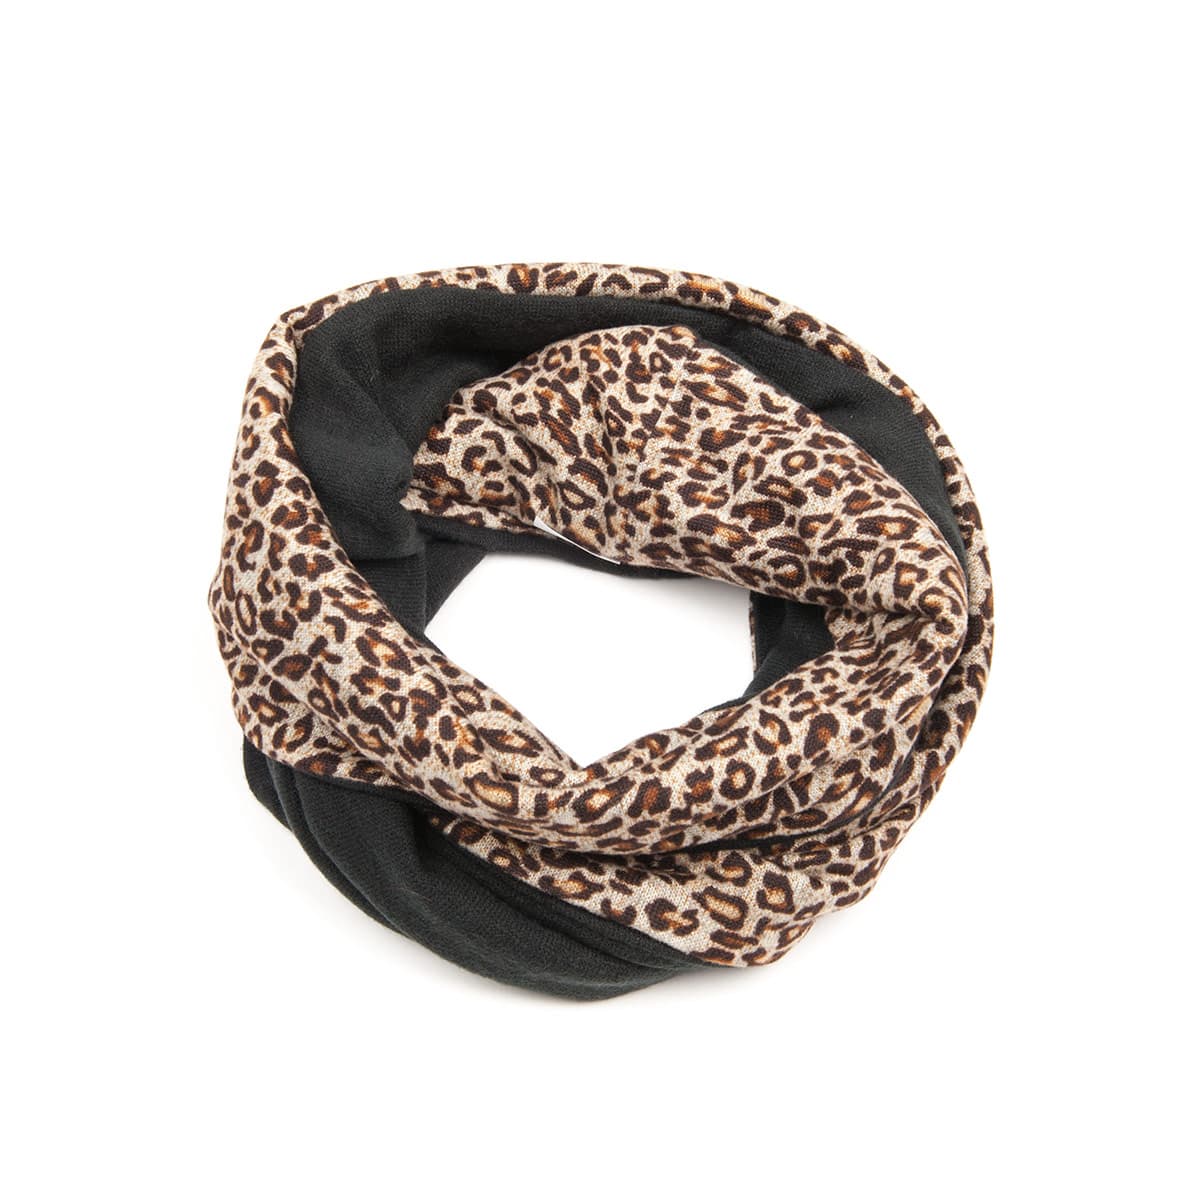 LOOP SCARF ANIMAL PRINT 30X60CM --> Online for hats, caps, headbands, gloves and